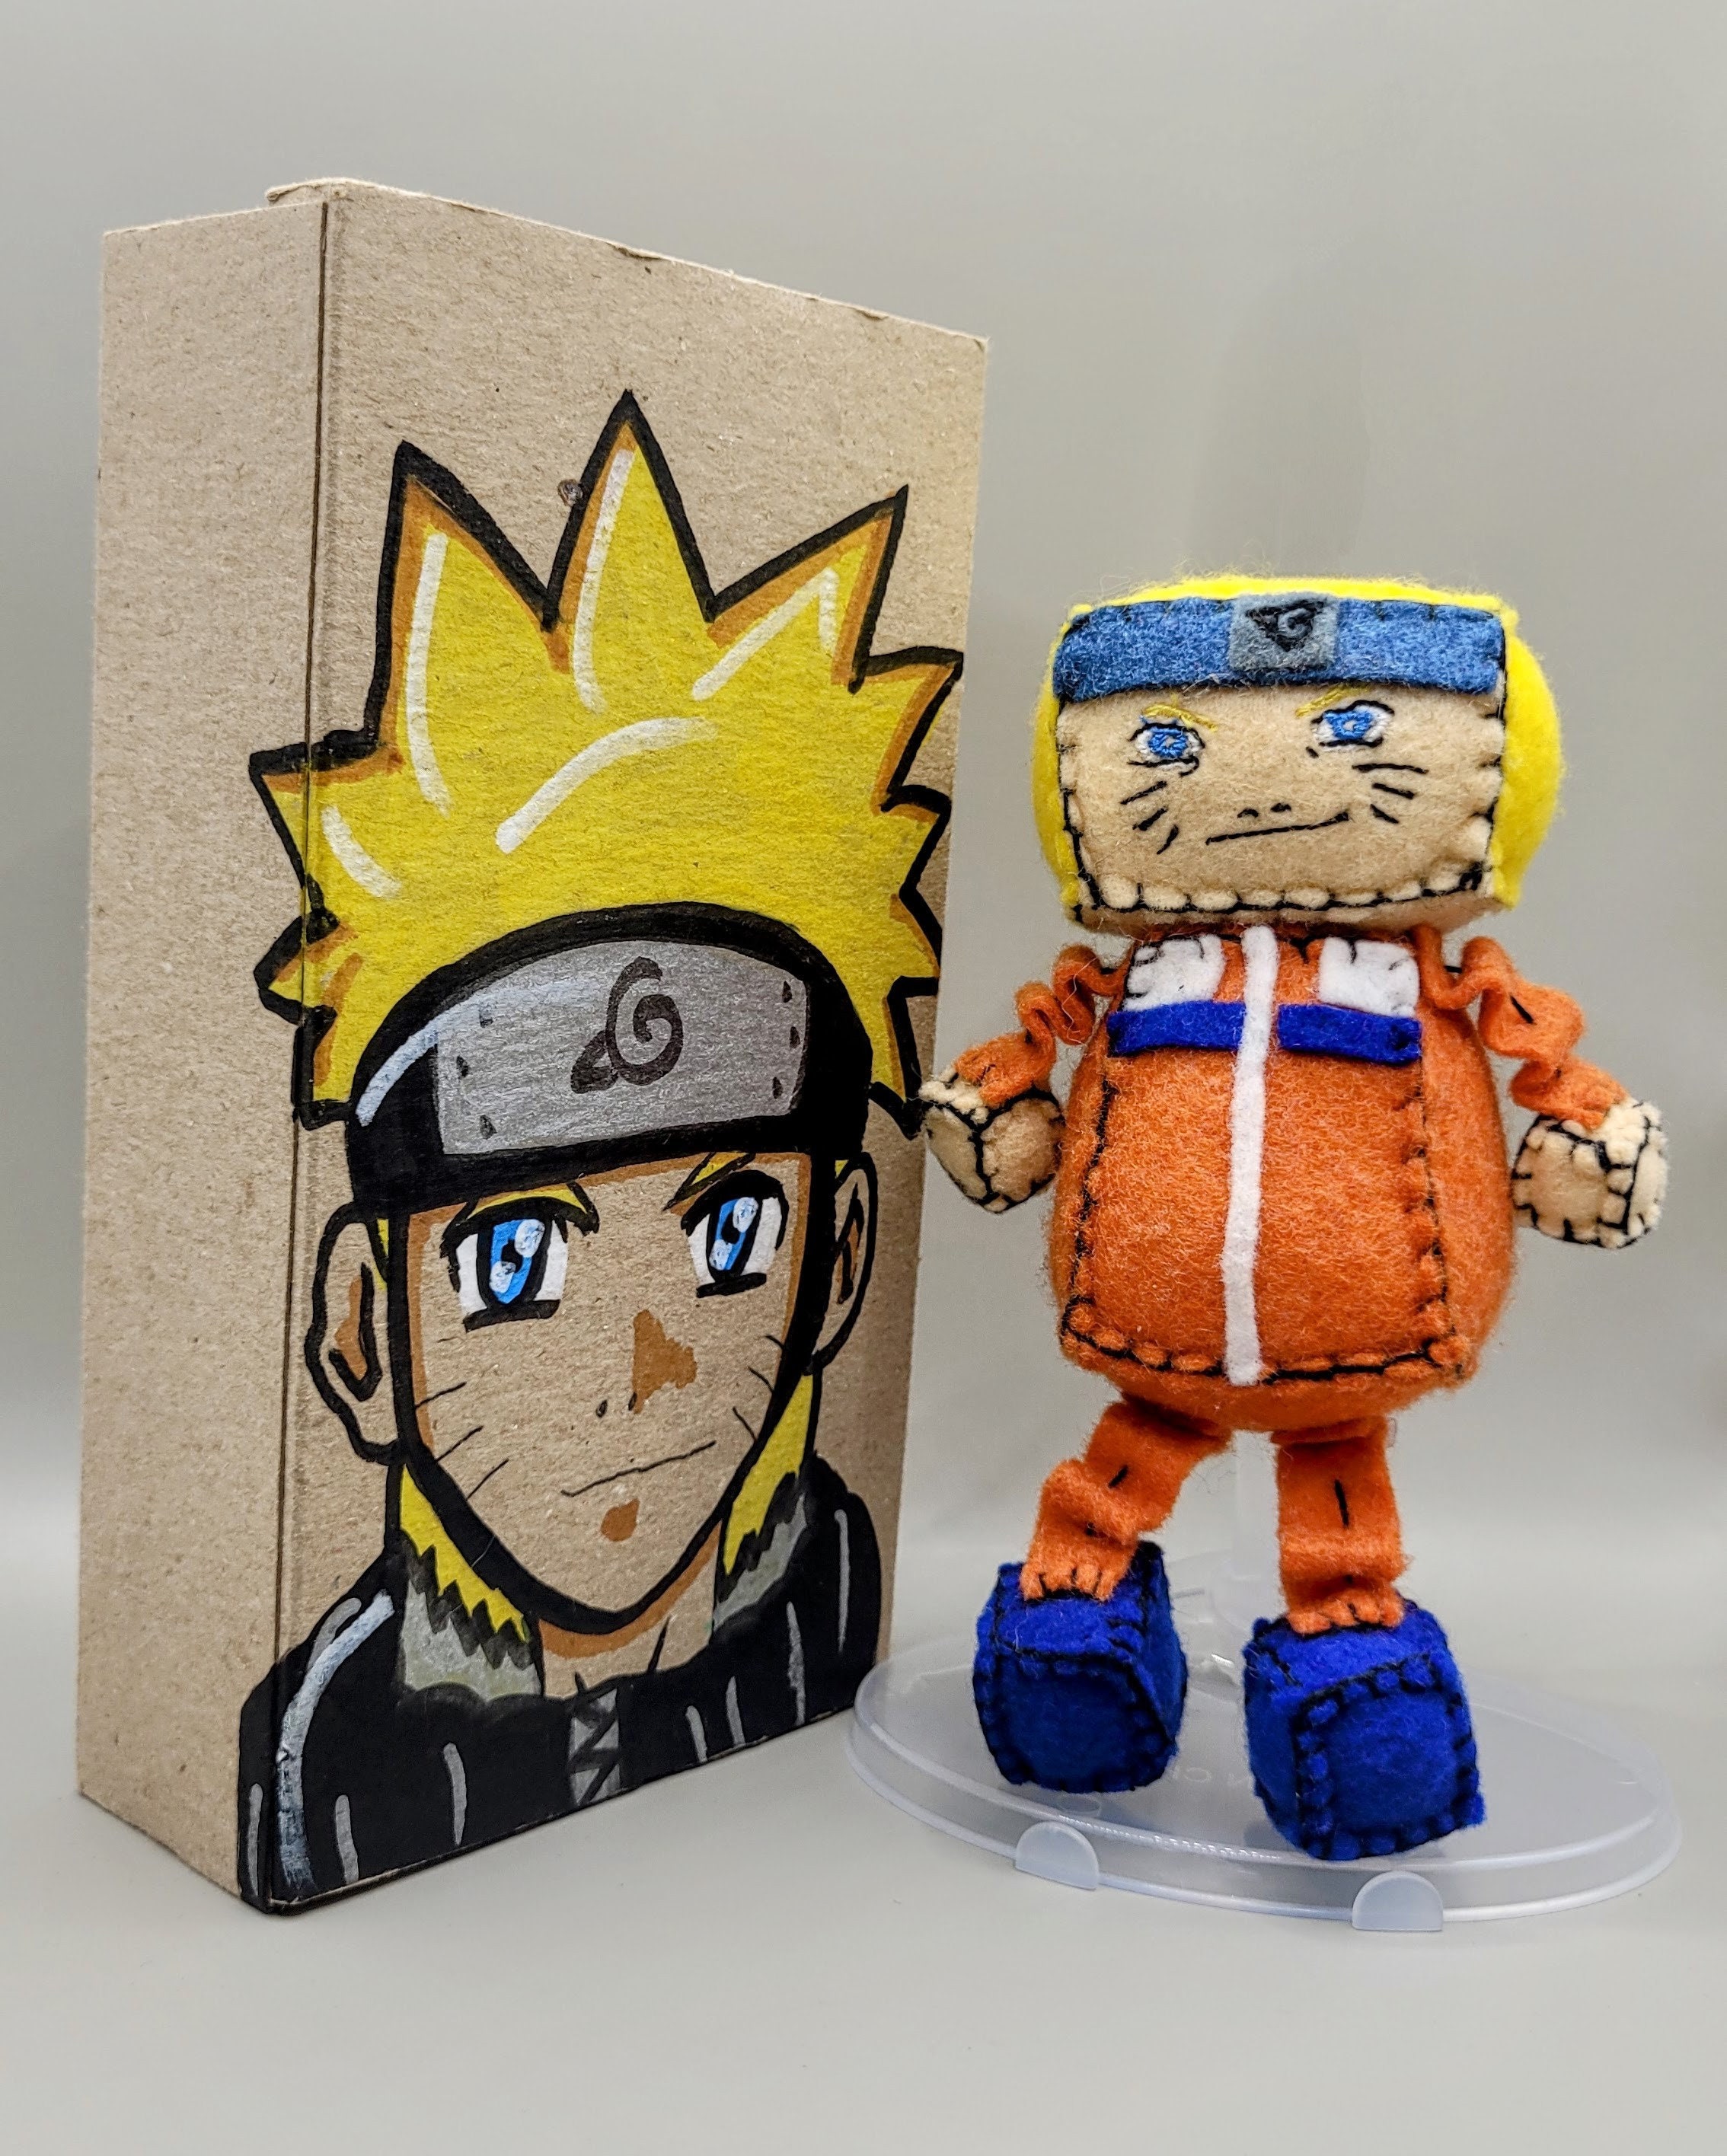 Naruto designed with CHEAP Materials! - #cheap #designed